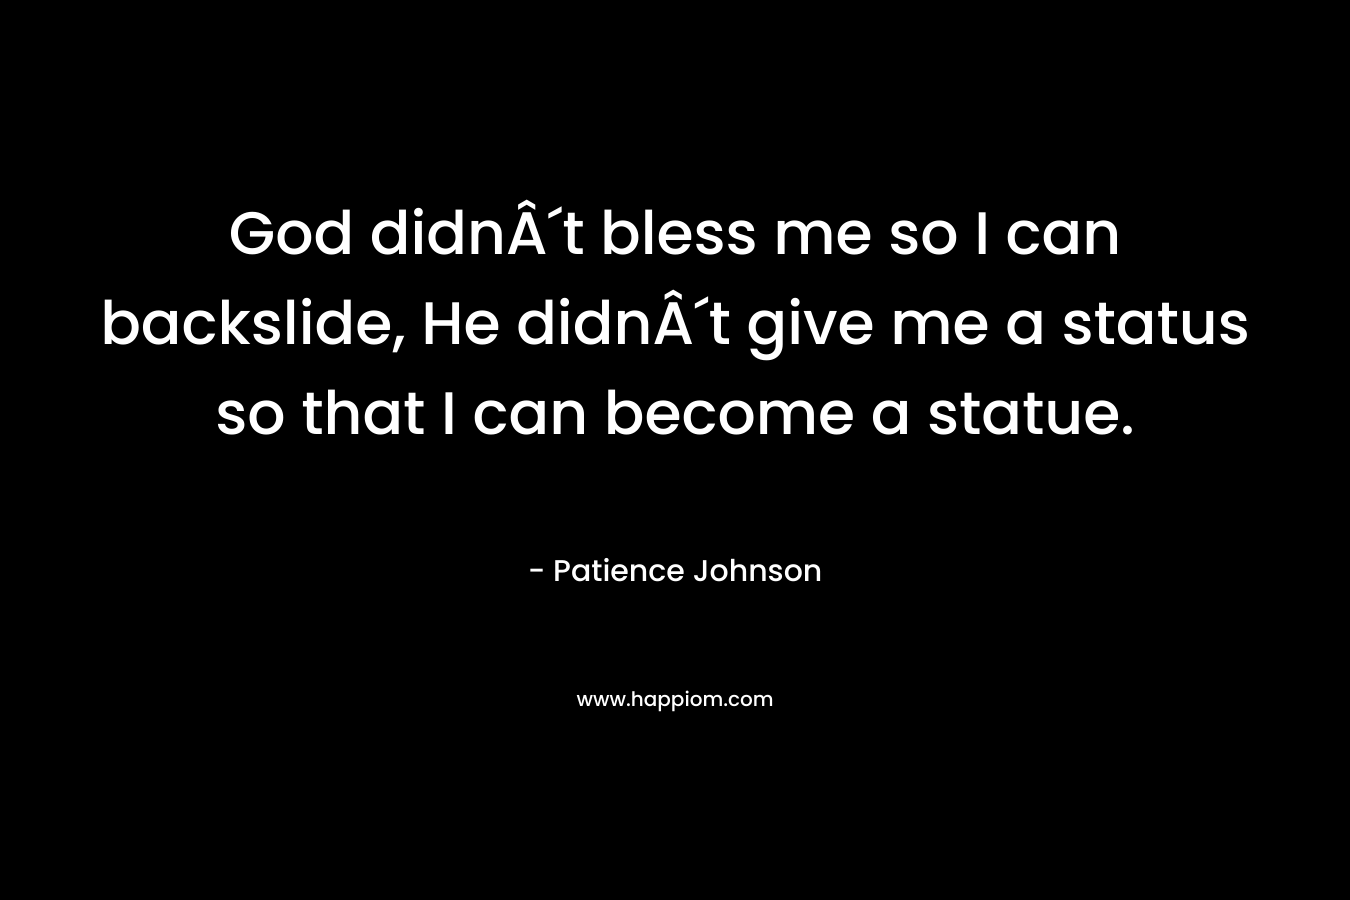 God didnÂ´t bless me so I can backslide, He didnÂ´t give me a status so that I can become a statue.